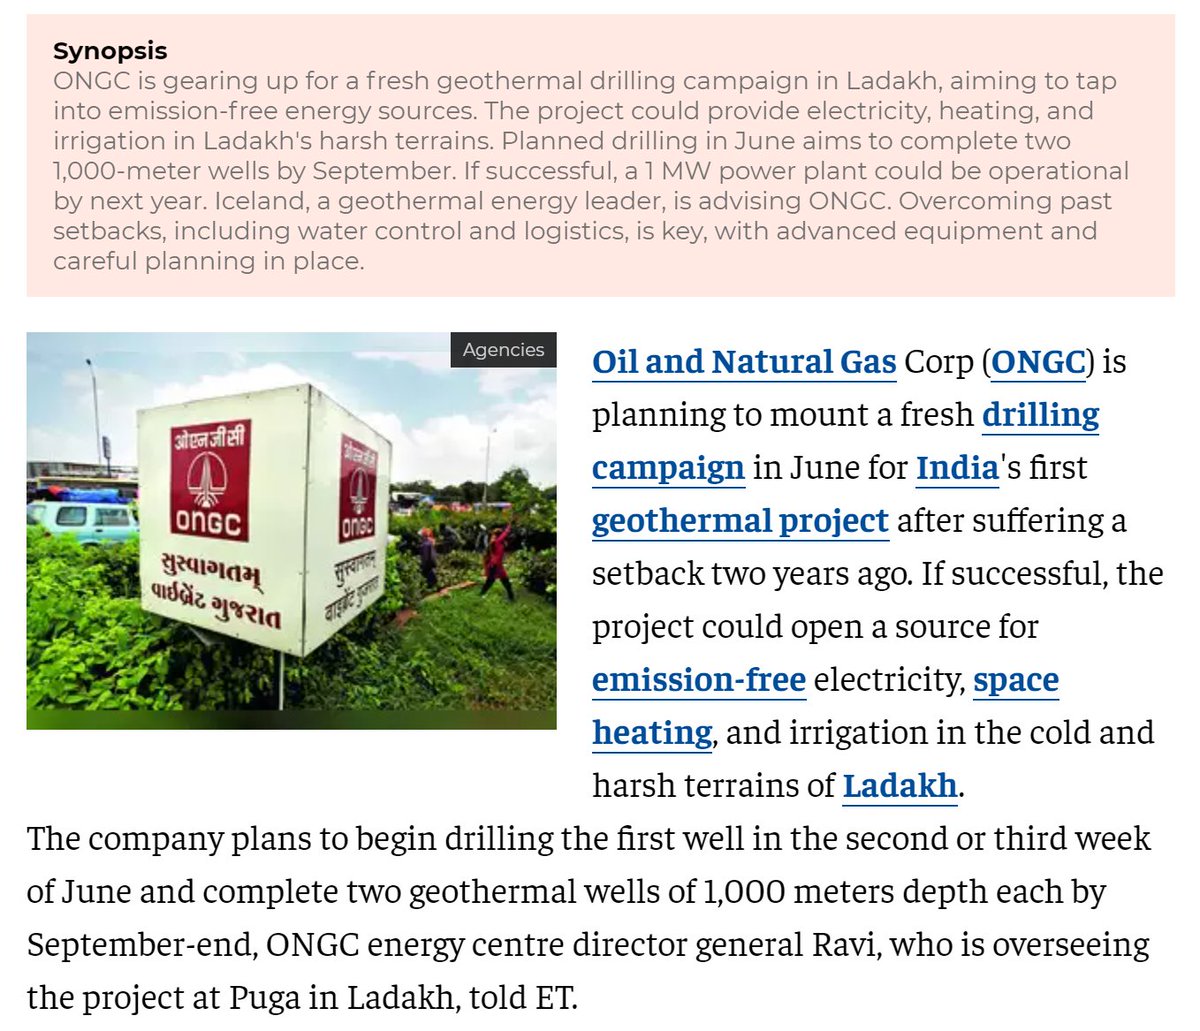 ONGC plans June drilling for India's first geothermal project in Ladakh

economictimes.indiatimes.com/industry/energ…